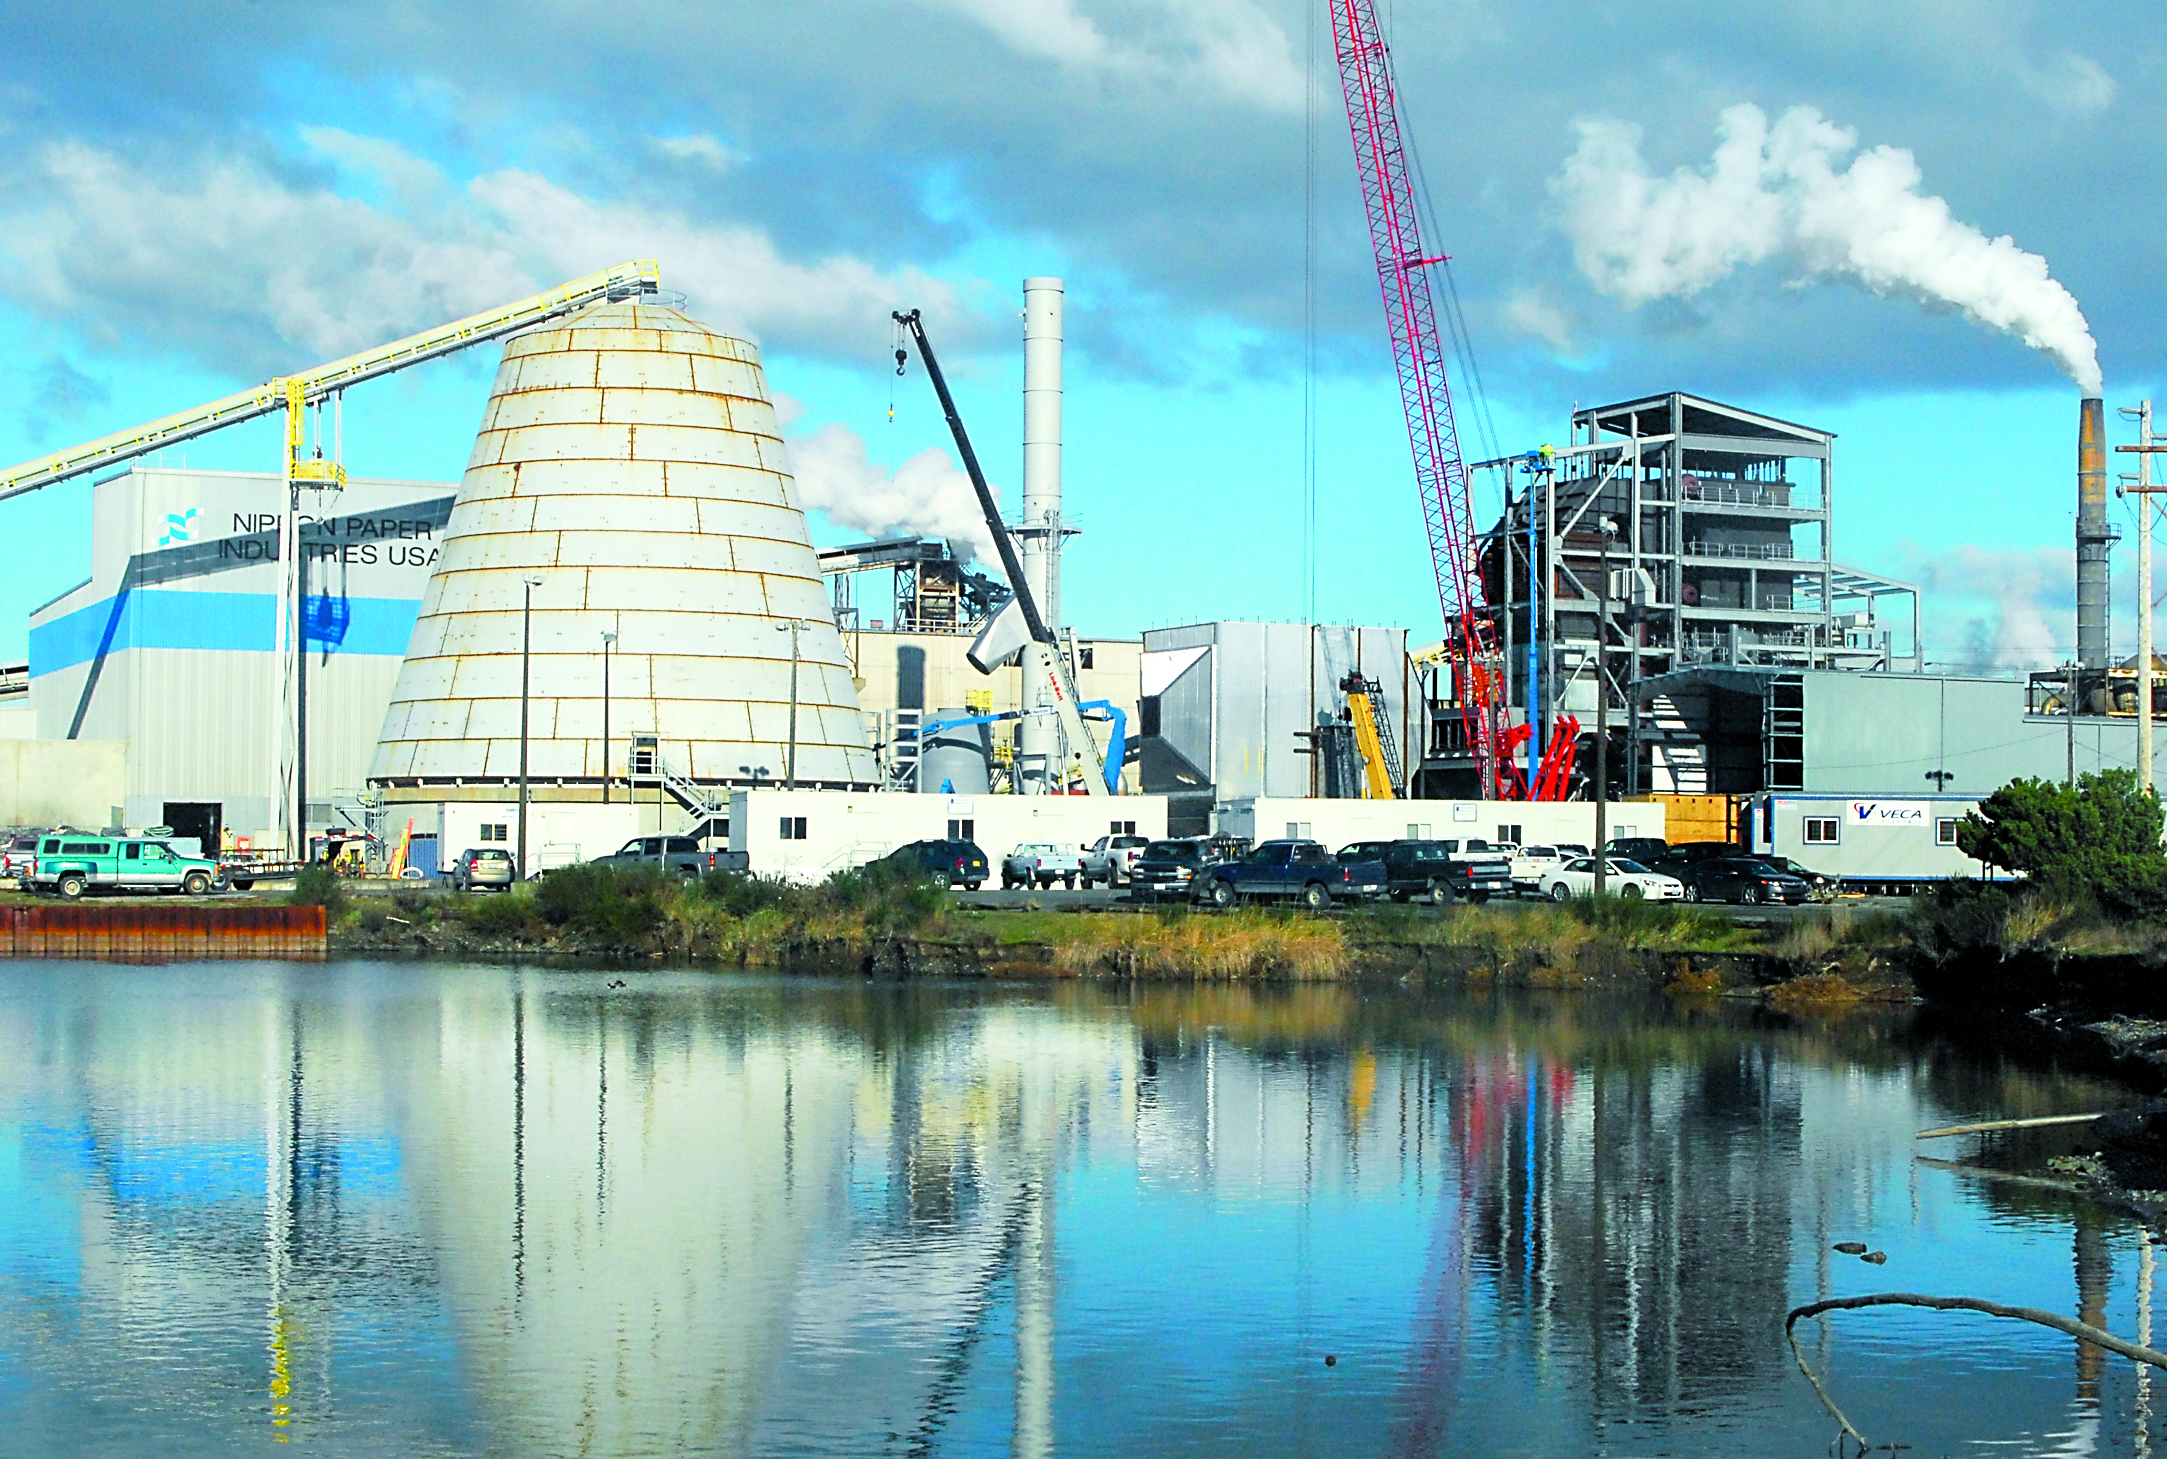 The cogeneration plant at Nippon Paper Industries USA is shown here during construction last winter. The plant